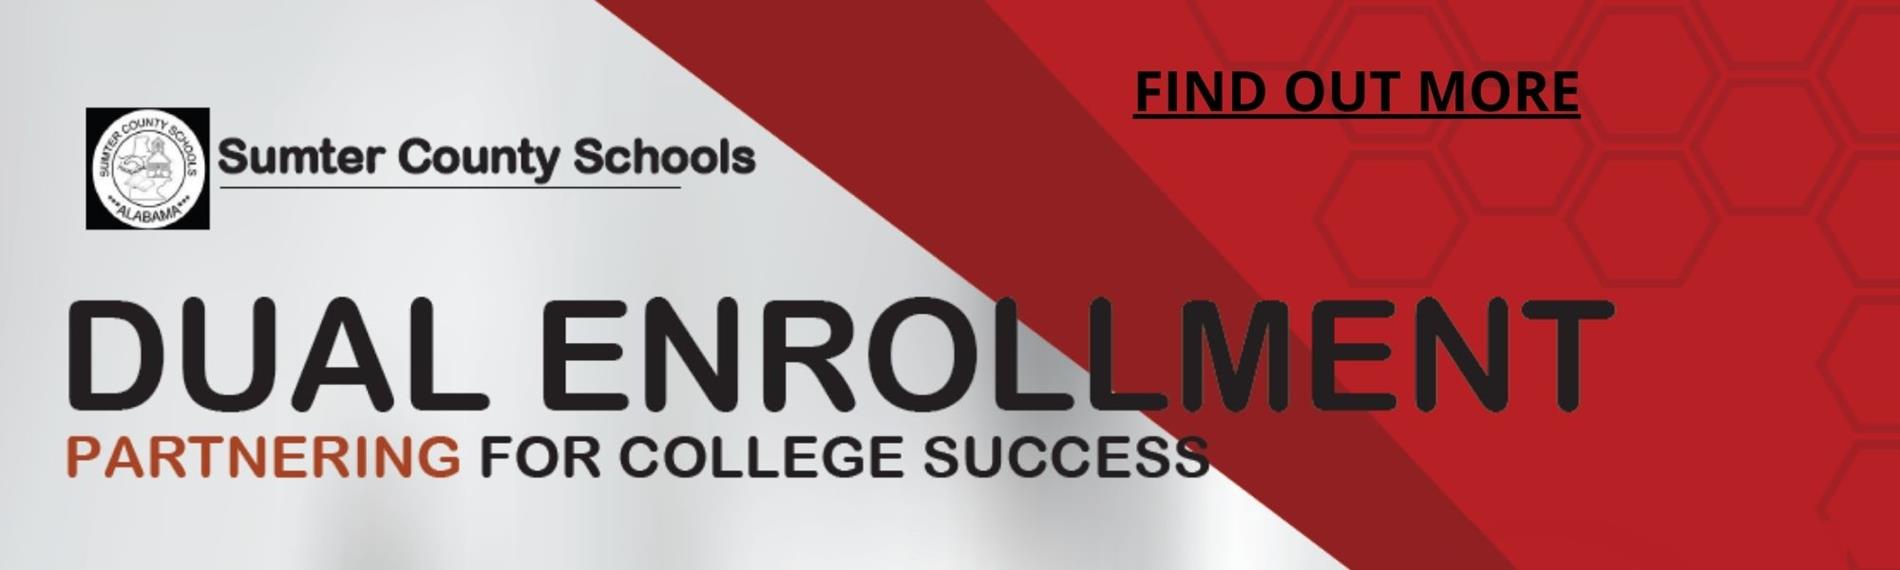 SUMTER COUNTY SCHOOL DUAL ENROLLMENT PARTNERING FOR COLLEGE SUCCESS - FIND OUT MORE